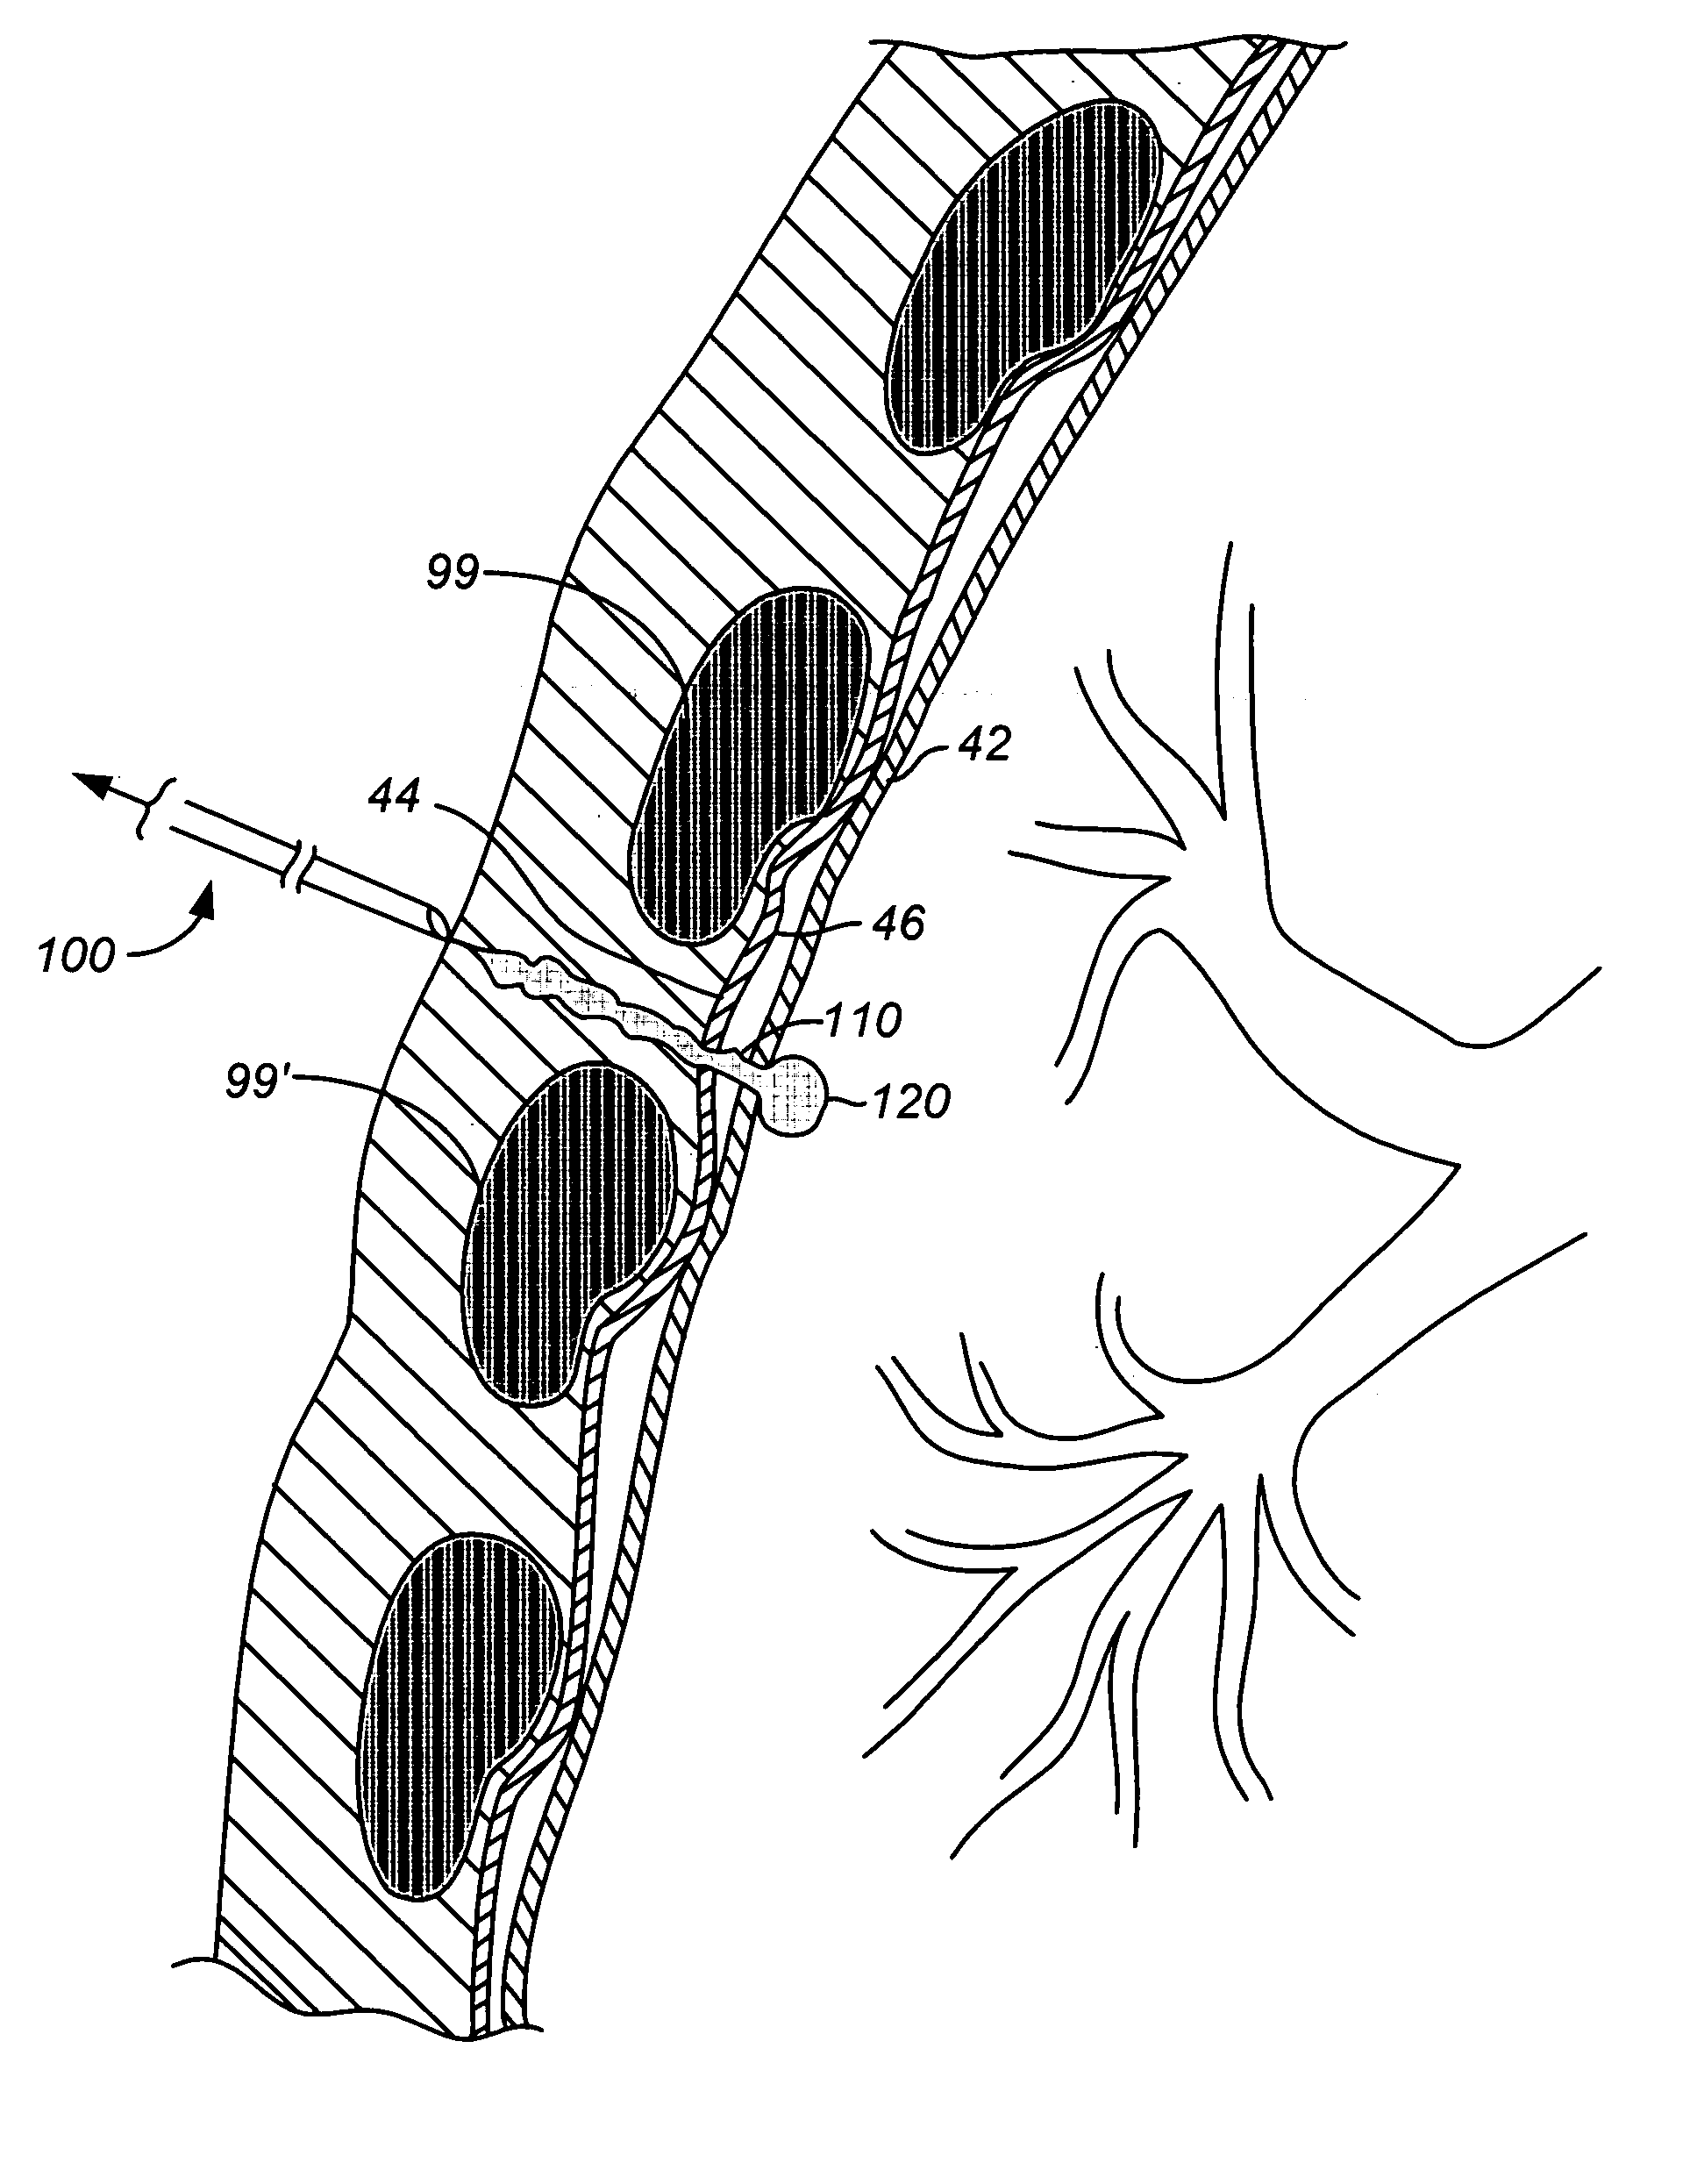 Lung device with sealing features